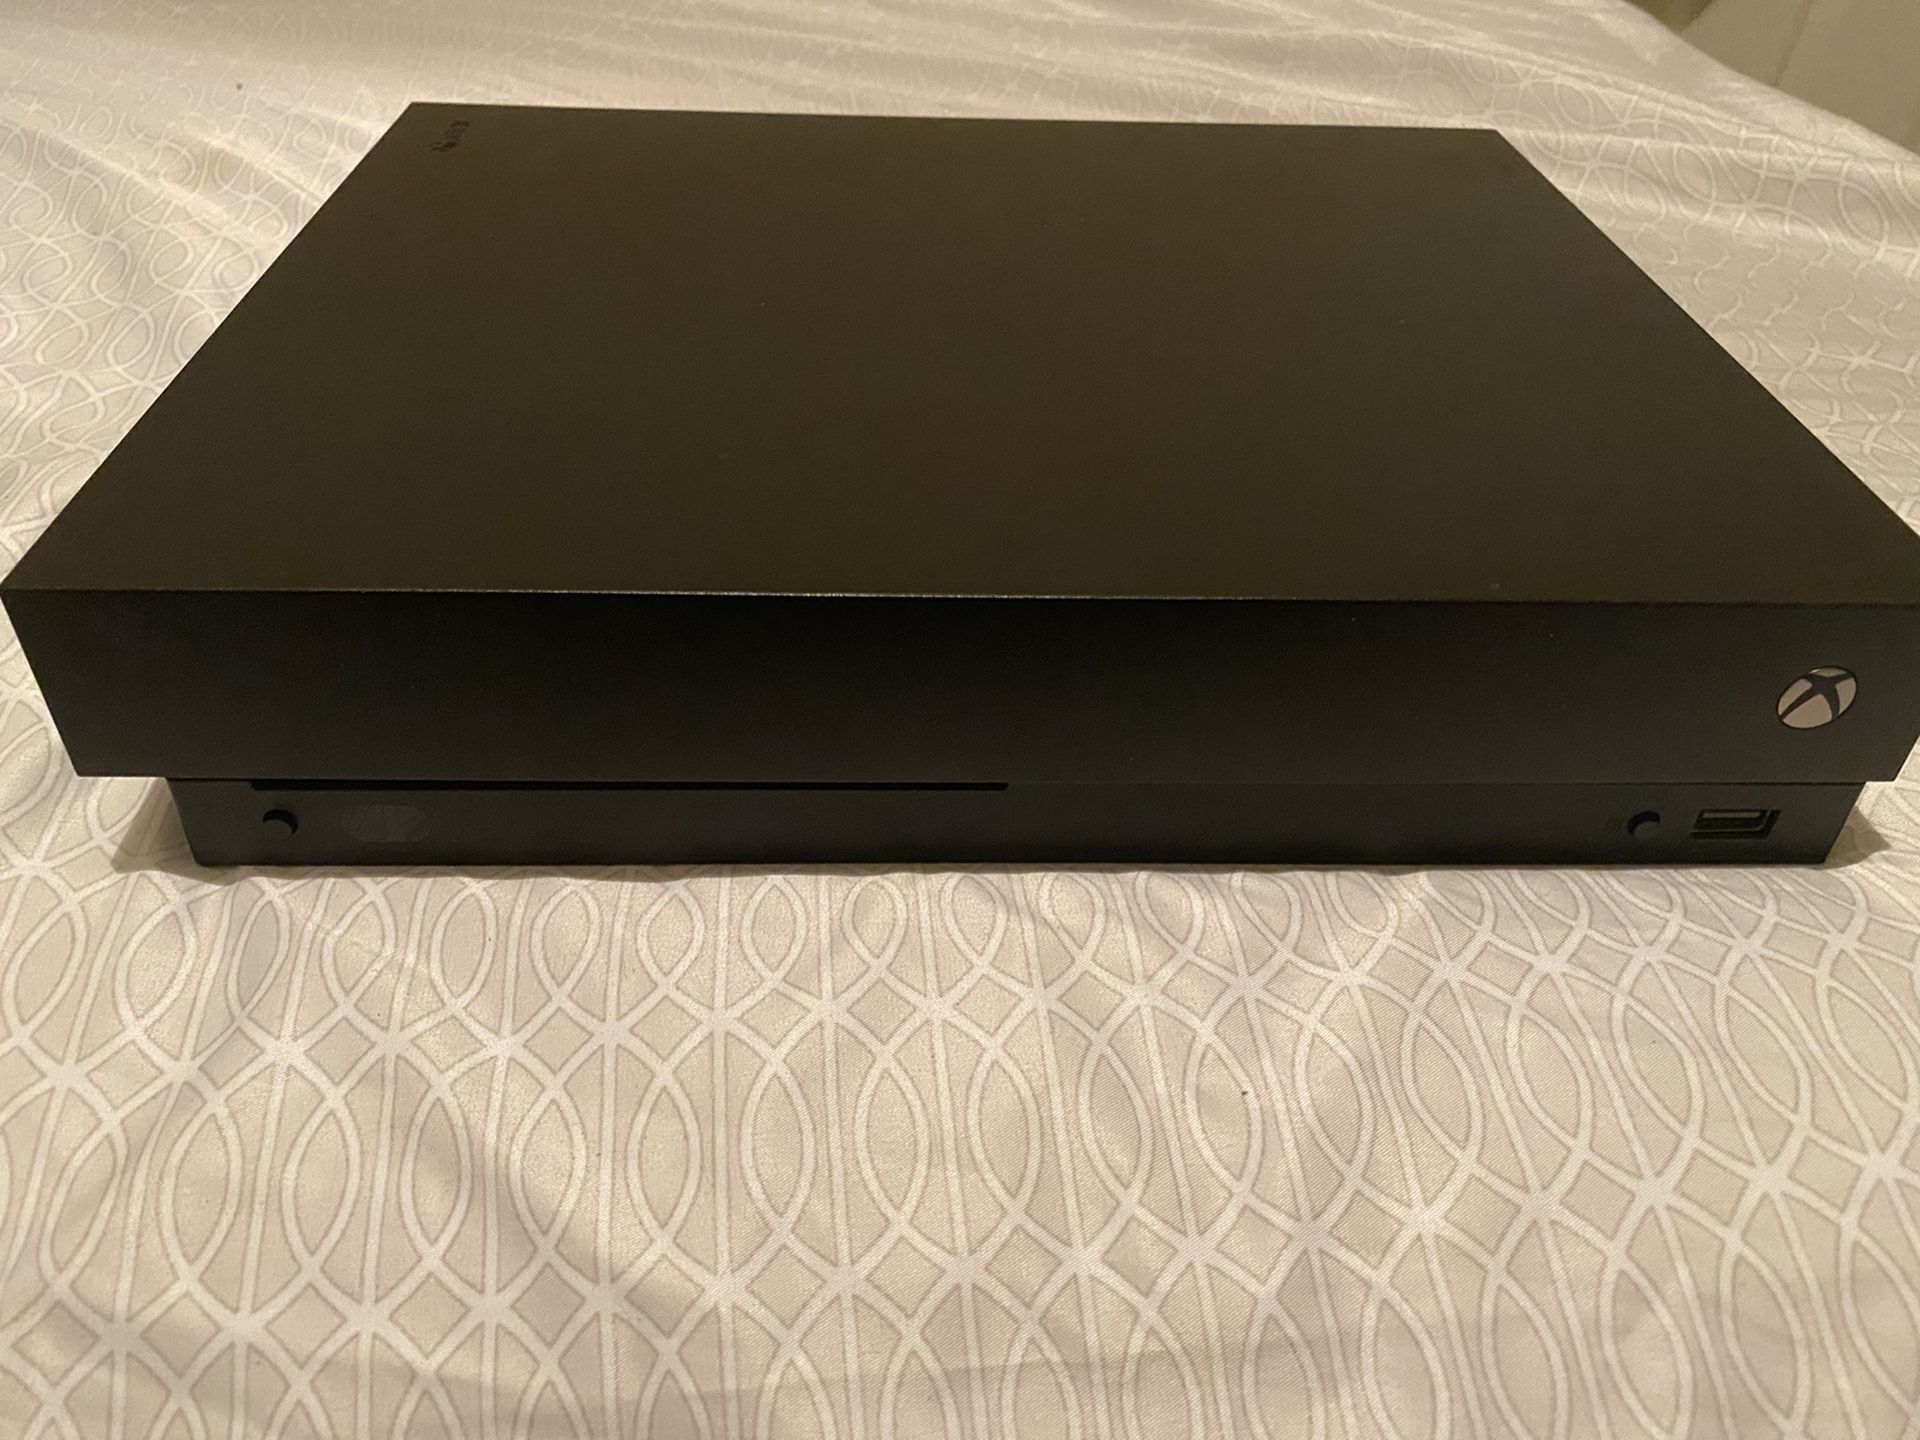 Xbox one x used 1TB (normal wear)